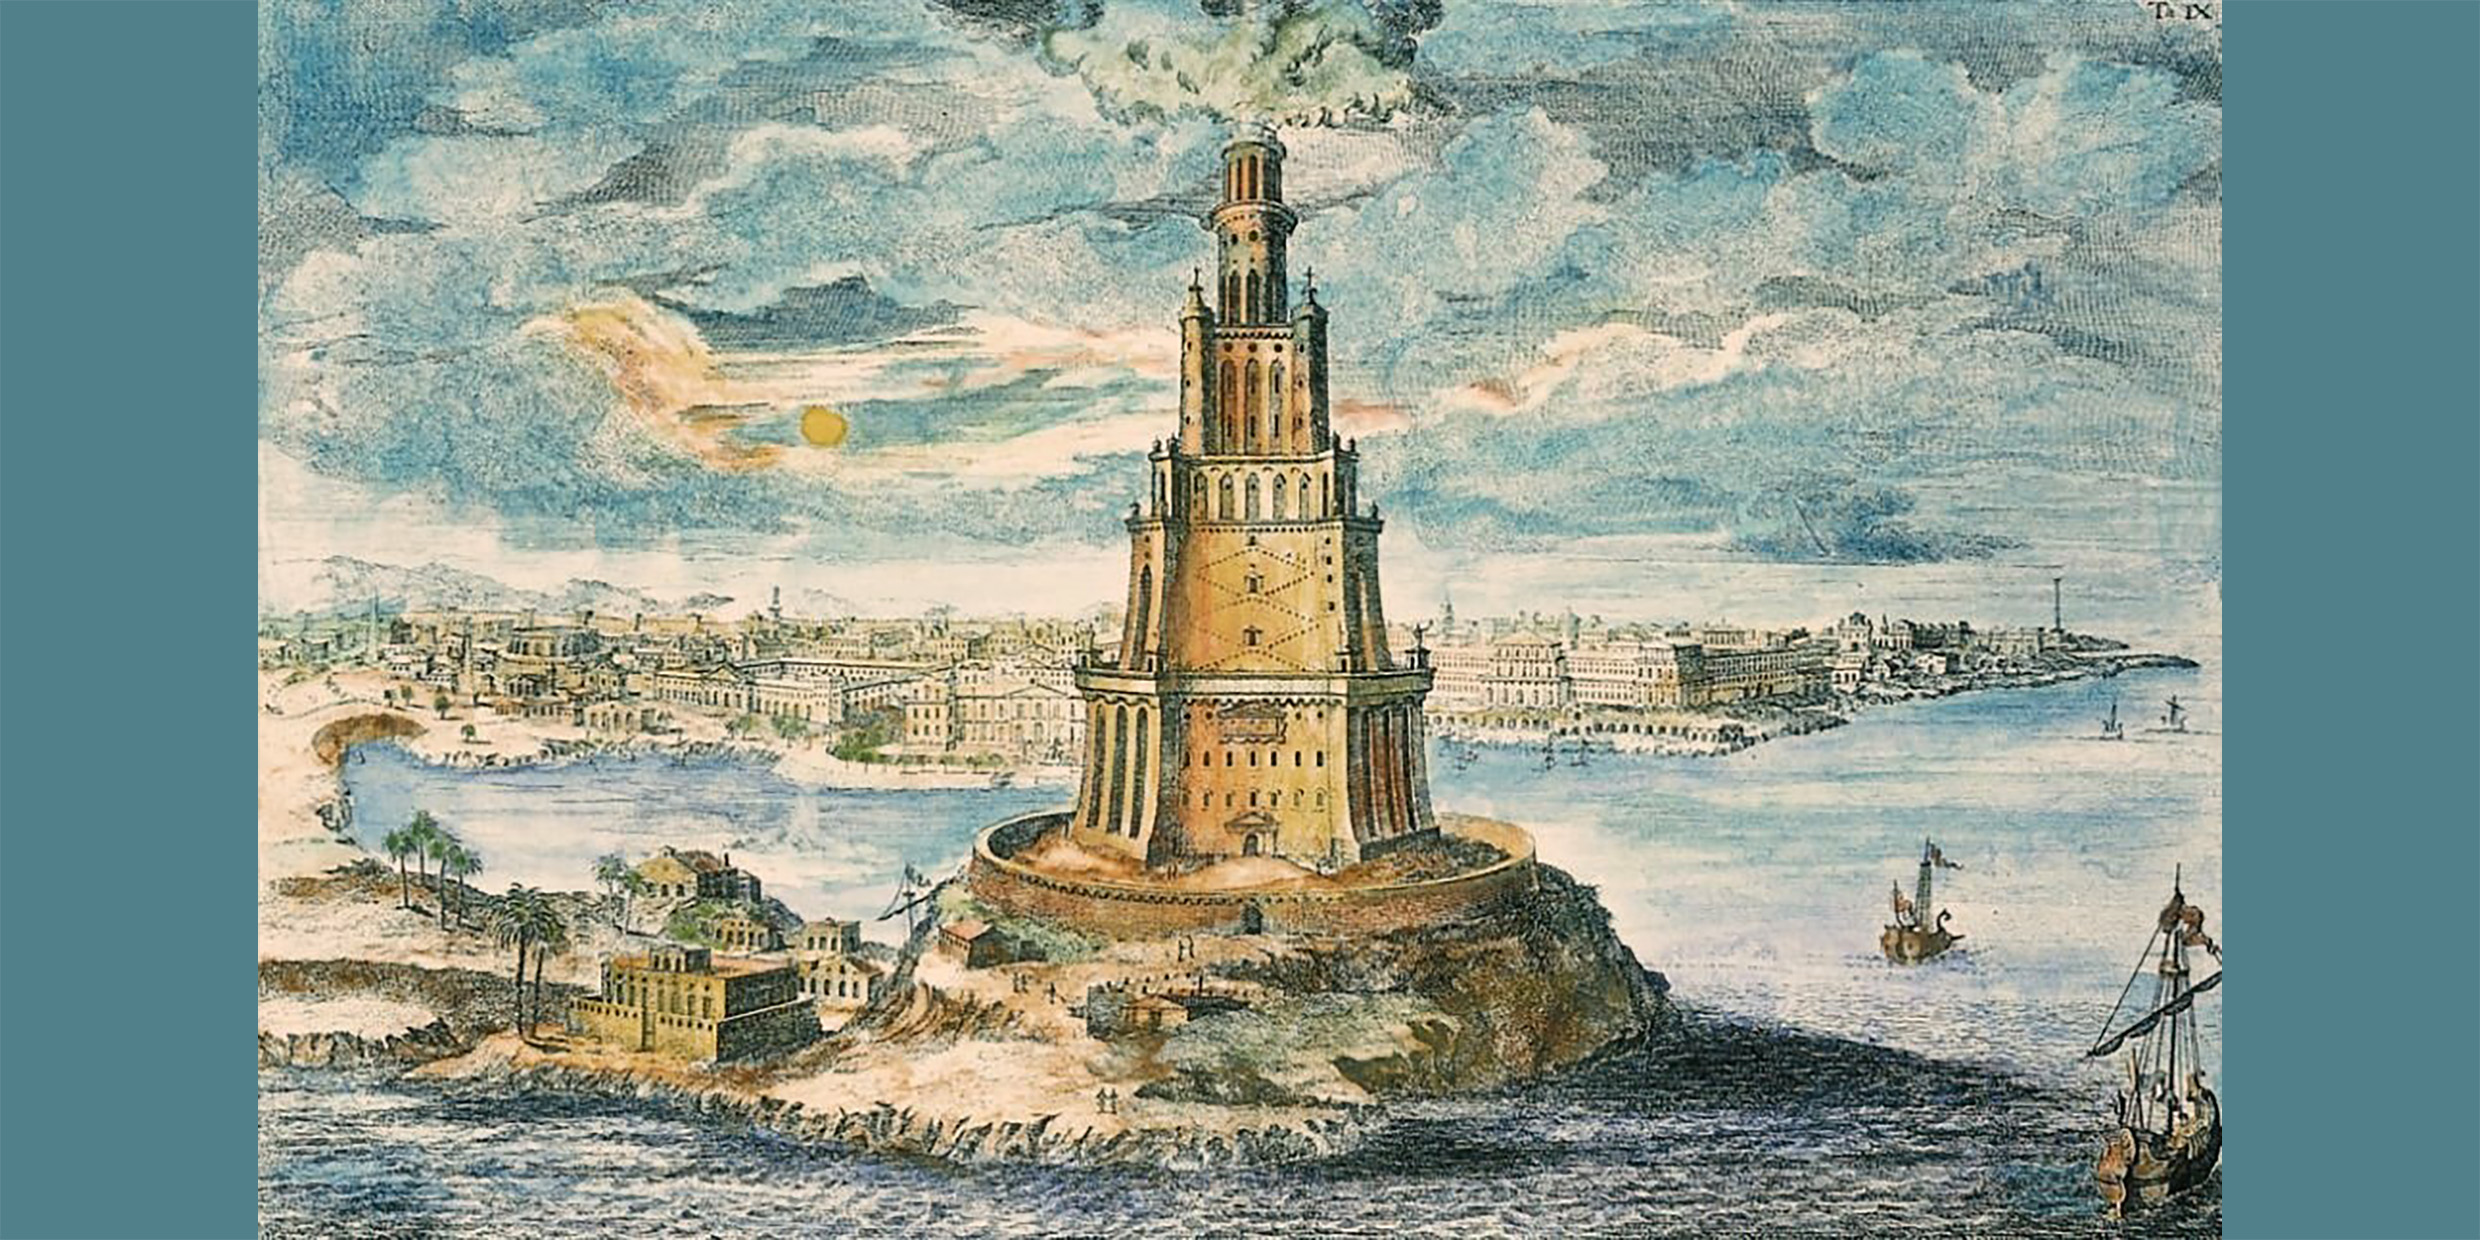 Illustration of the Lighthouse of Alexandria as it may have appeared in antiquity